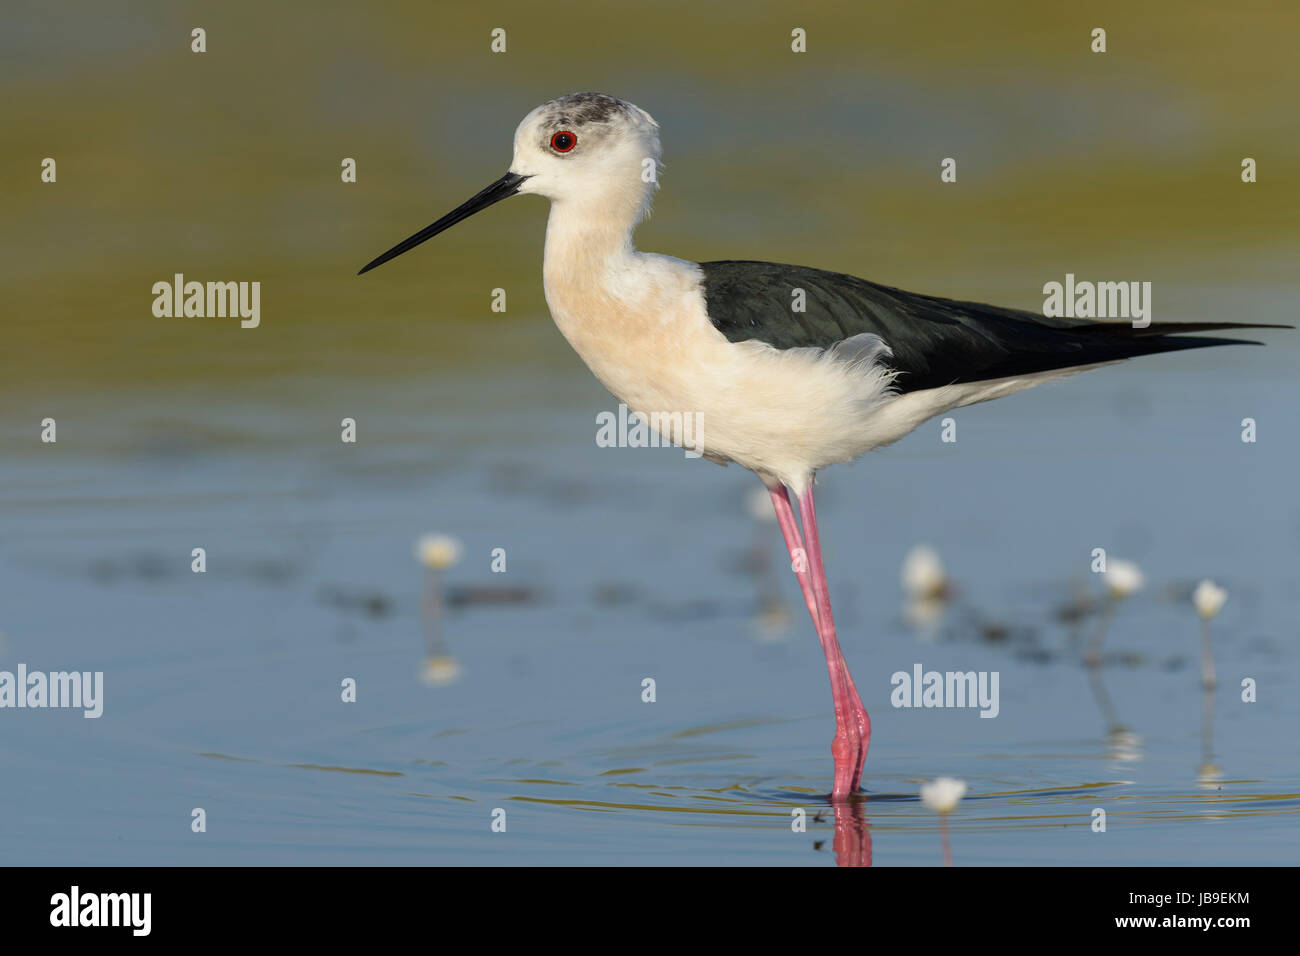 Black-winged Stilt (Himantopus himantopus) standing in shallow water, Extremadura, Spain Stock Photo